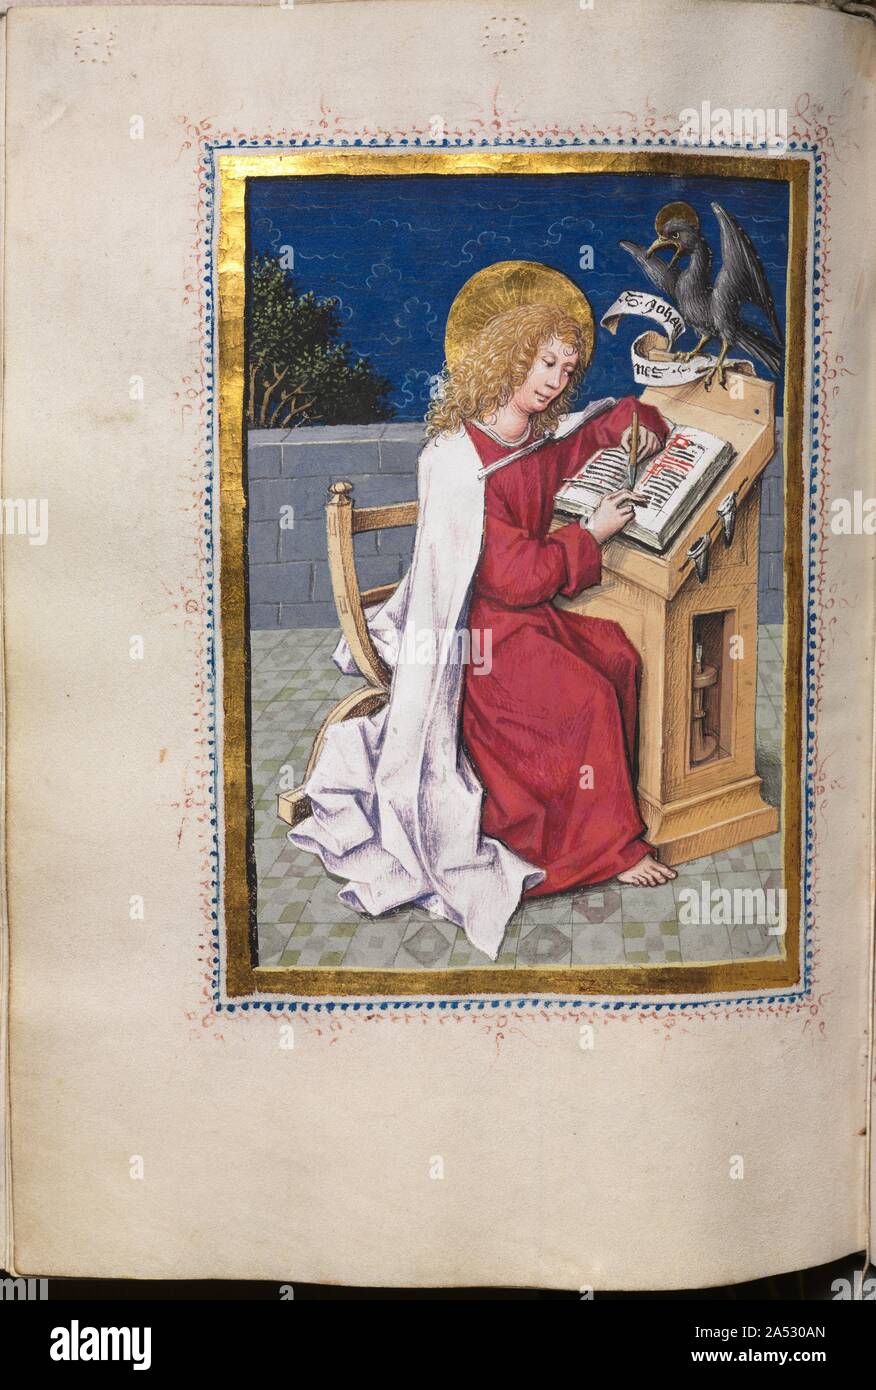 Gospel Book with Evangelist Portraits: Saint John, c. 1480. Each of the four gospels, here in Latin, are preceded by a full-page miniature of the appropriate Evangelist. As is conventional, the Evangelists are represented as contemporary scribes seated at a lectern surrounded by all the accouterments of the trade---inkpots, quill pens, penknives, etc. The miniatures style is characteristically German late Gothic in its expressive use of angular drapery and realistic detail. Each miniature, however, bears the marks of The Hausbuch Master's hand: notice the terrace space for each figure and the Stock Photo